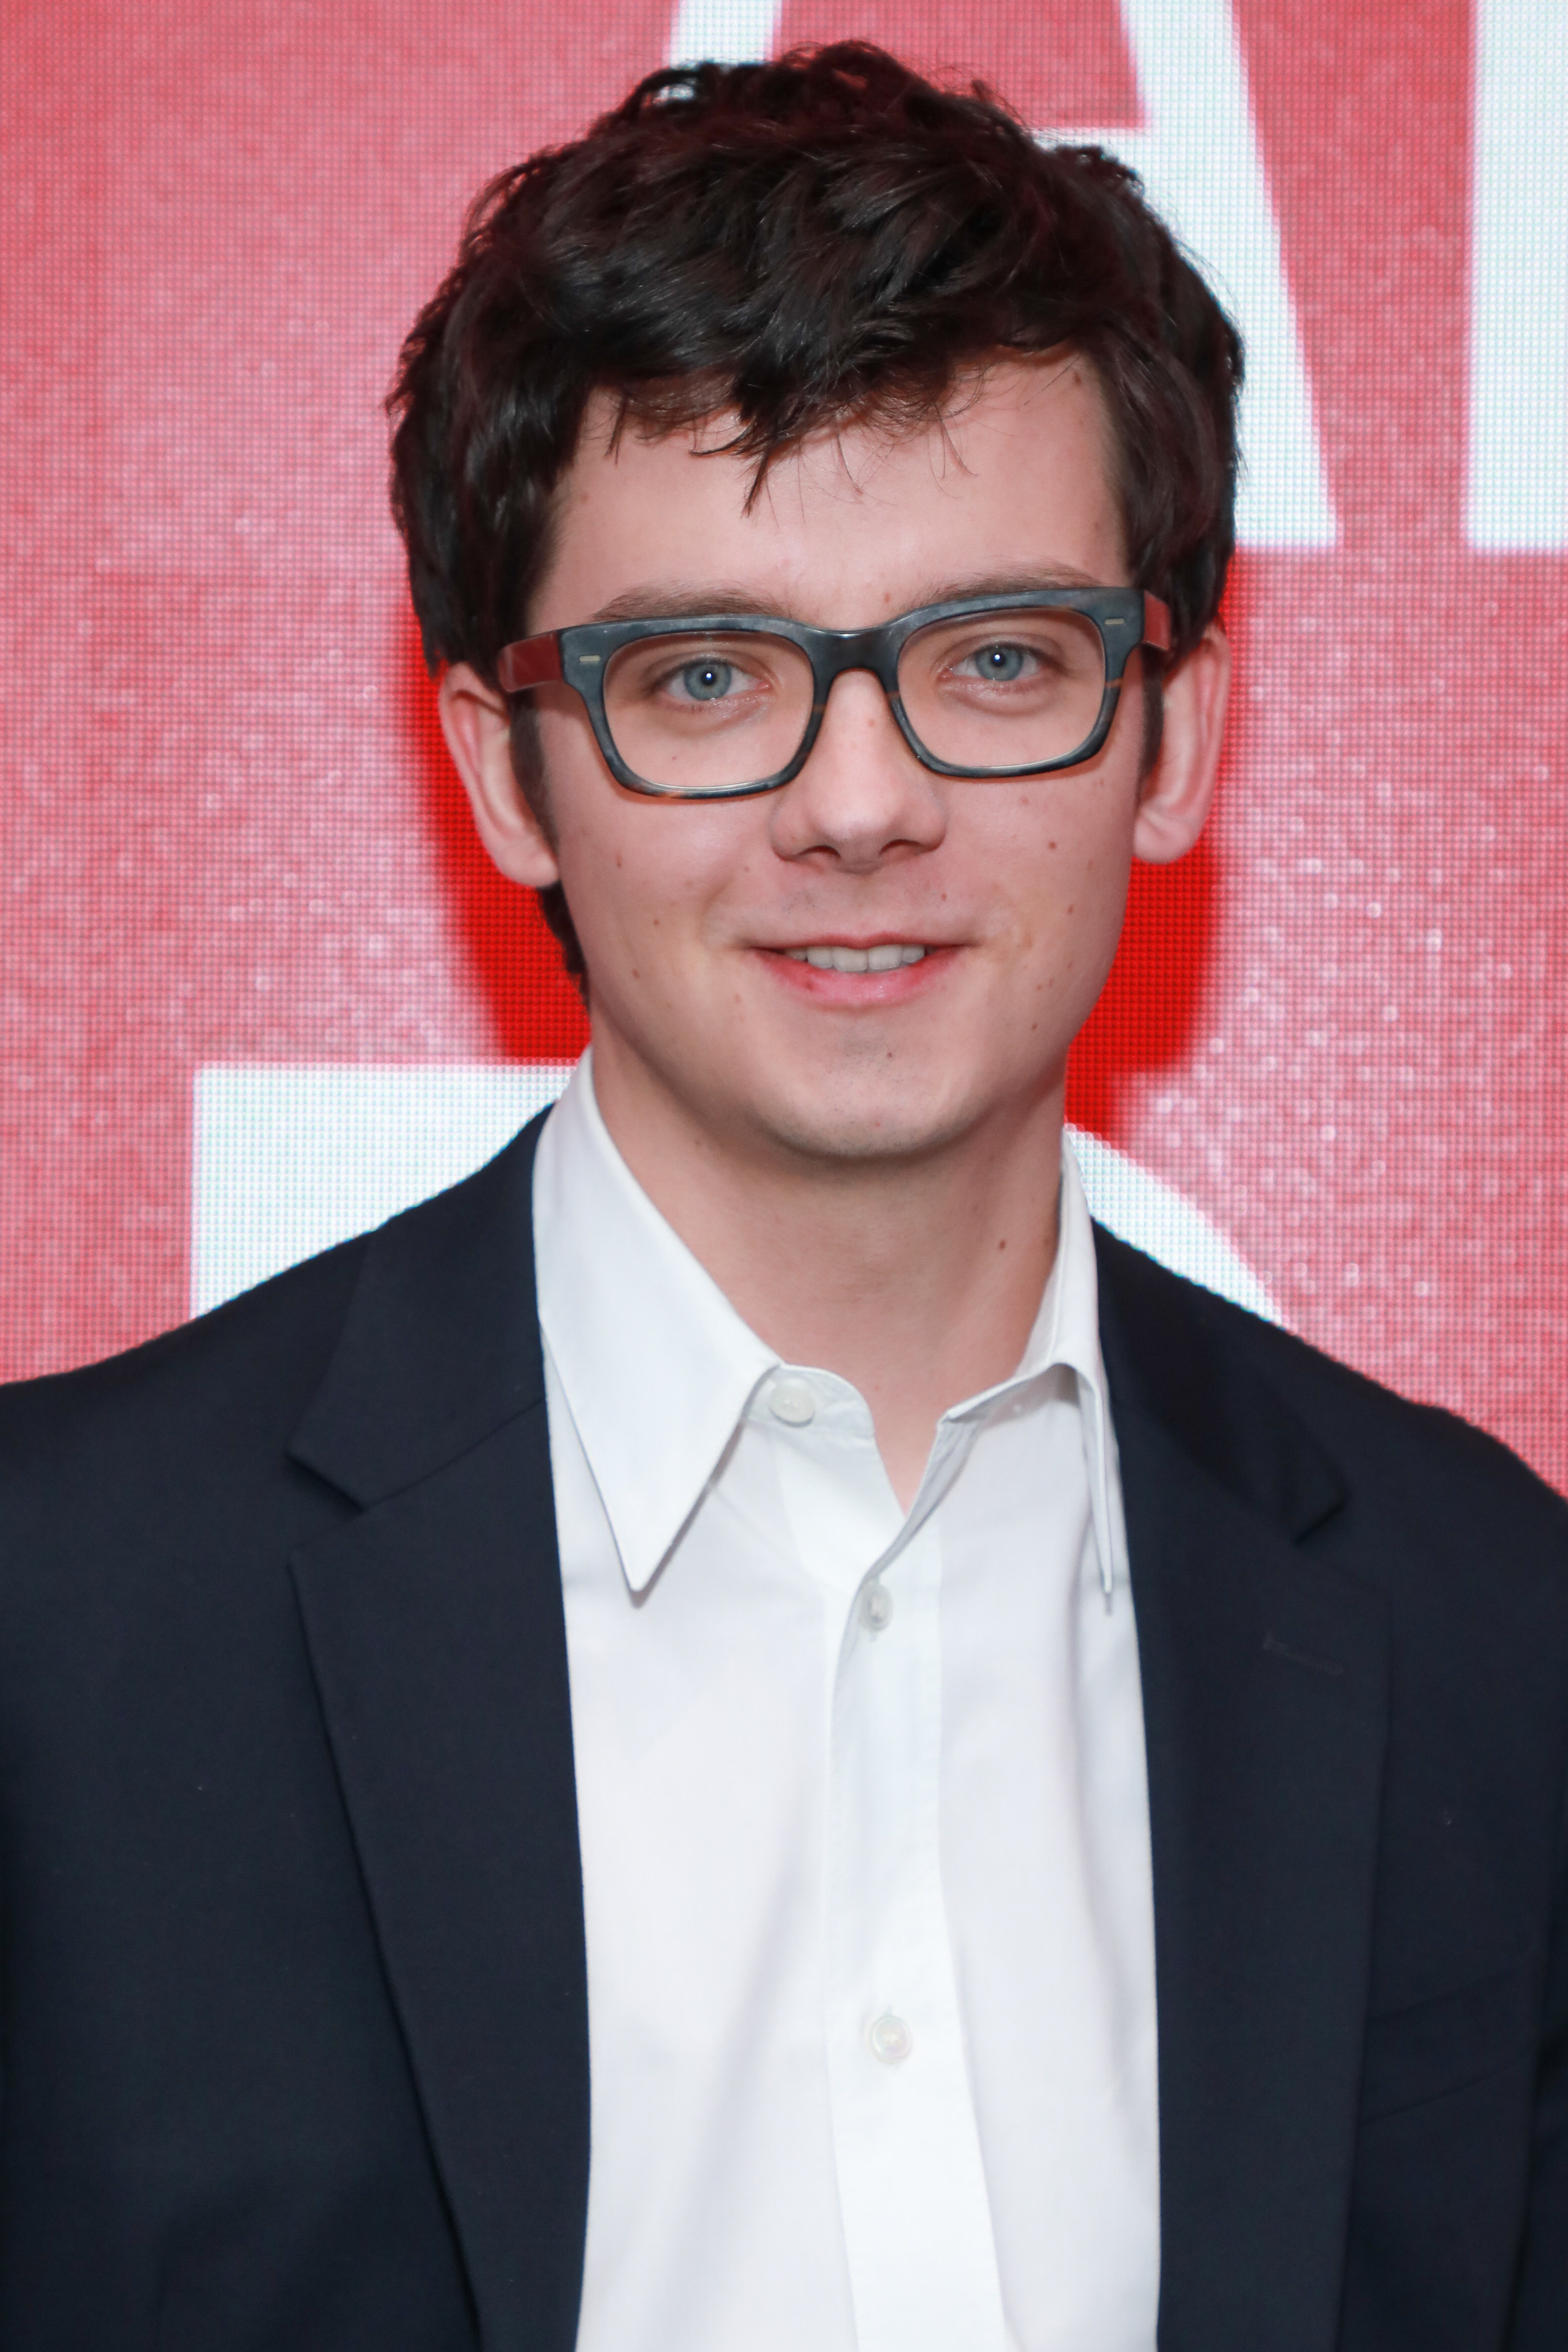 Asa Butterfield posing at a red carpet